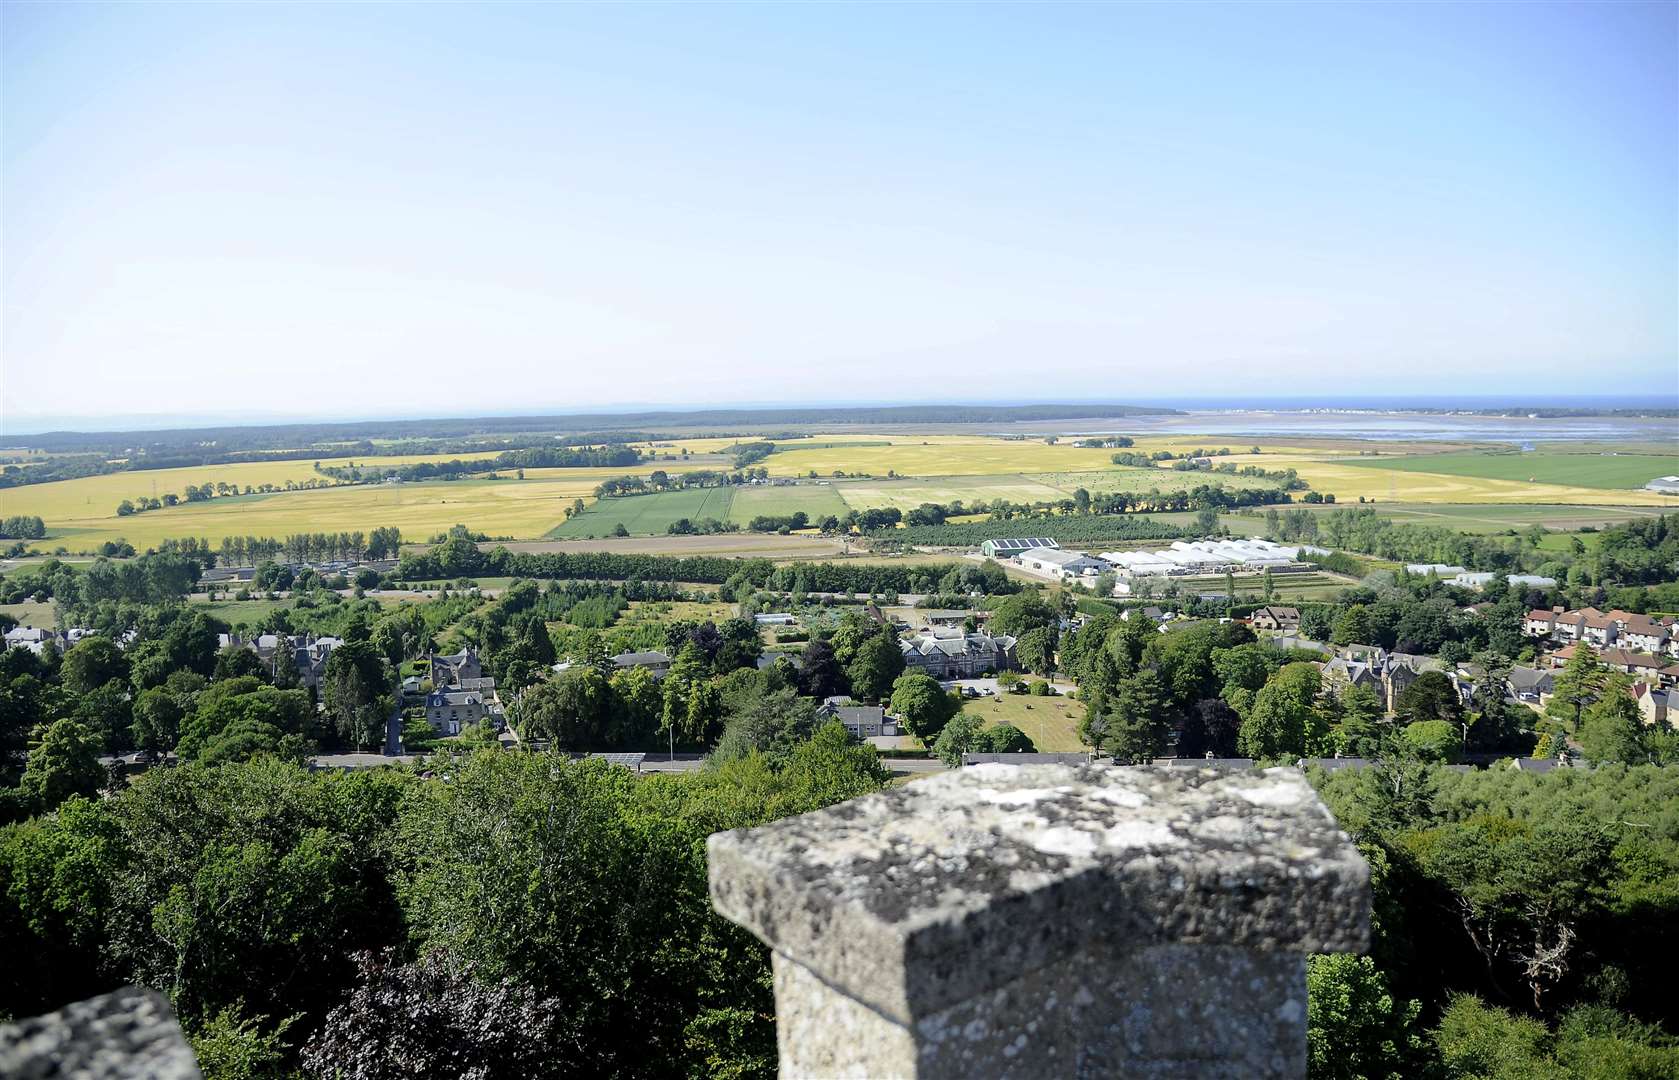 The view from Nelson's Tower in Forres.